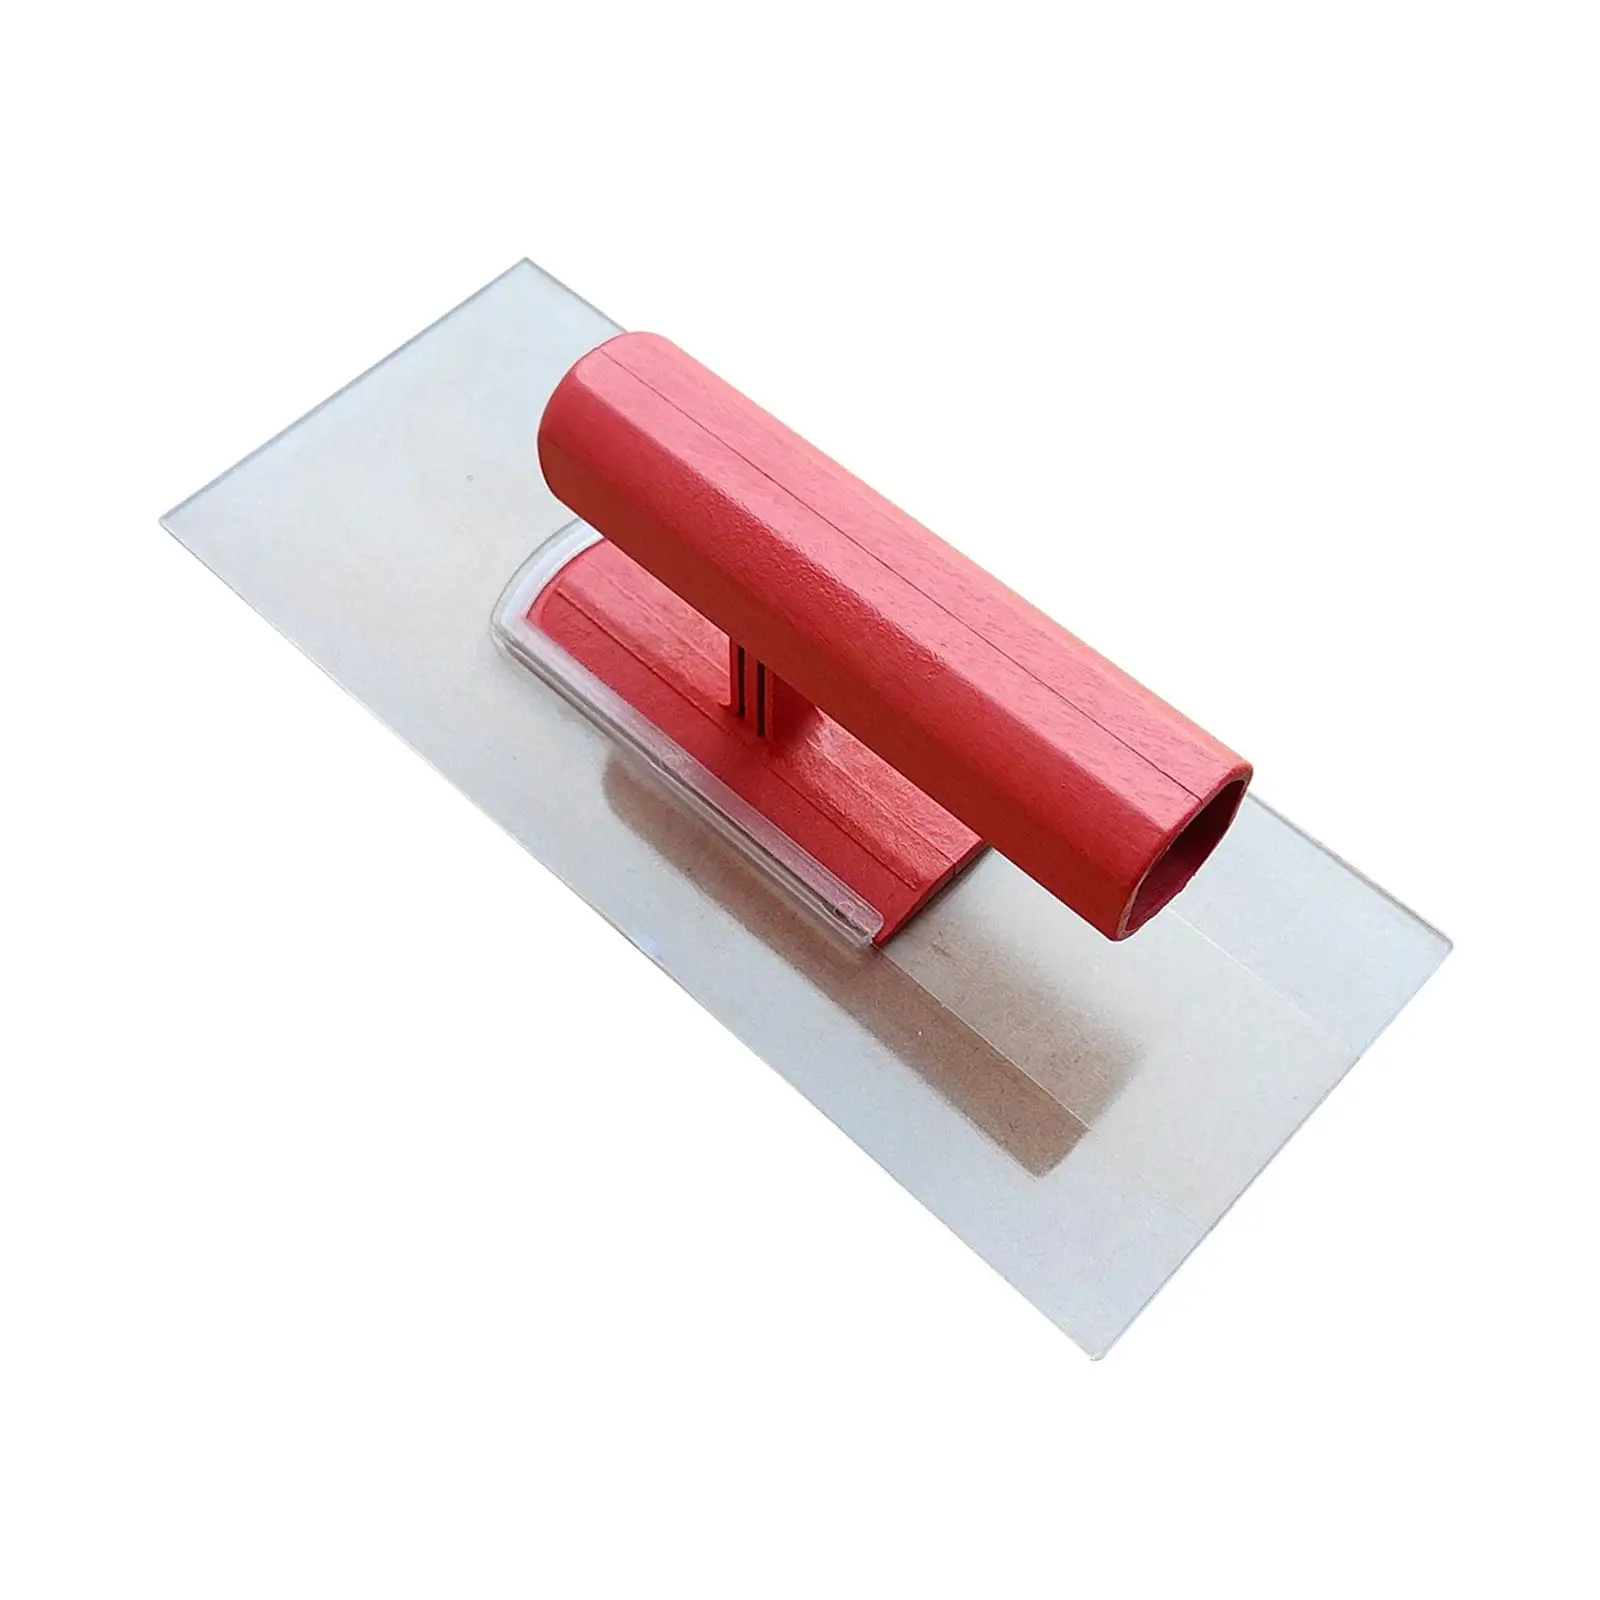 Drywall Skimming Blade Devices Finishing Trowel Plastering Trowel for Grouting